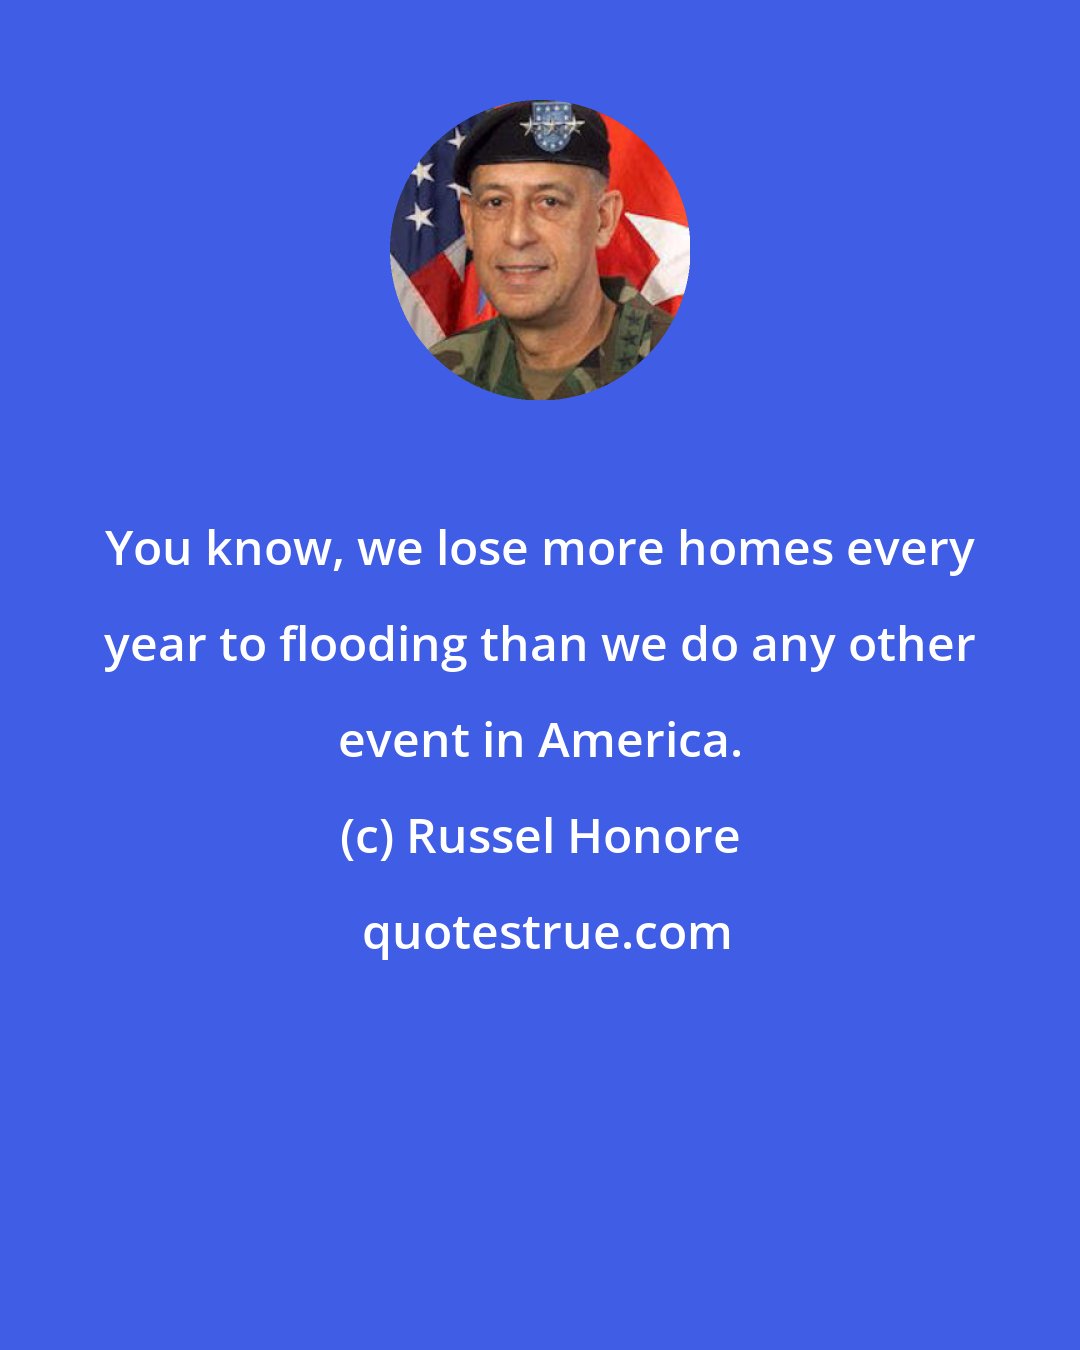 Russel Honore: You know, we lose more homes every year to flooding than we do any other event in America.